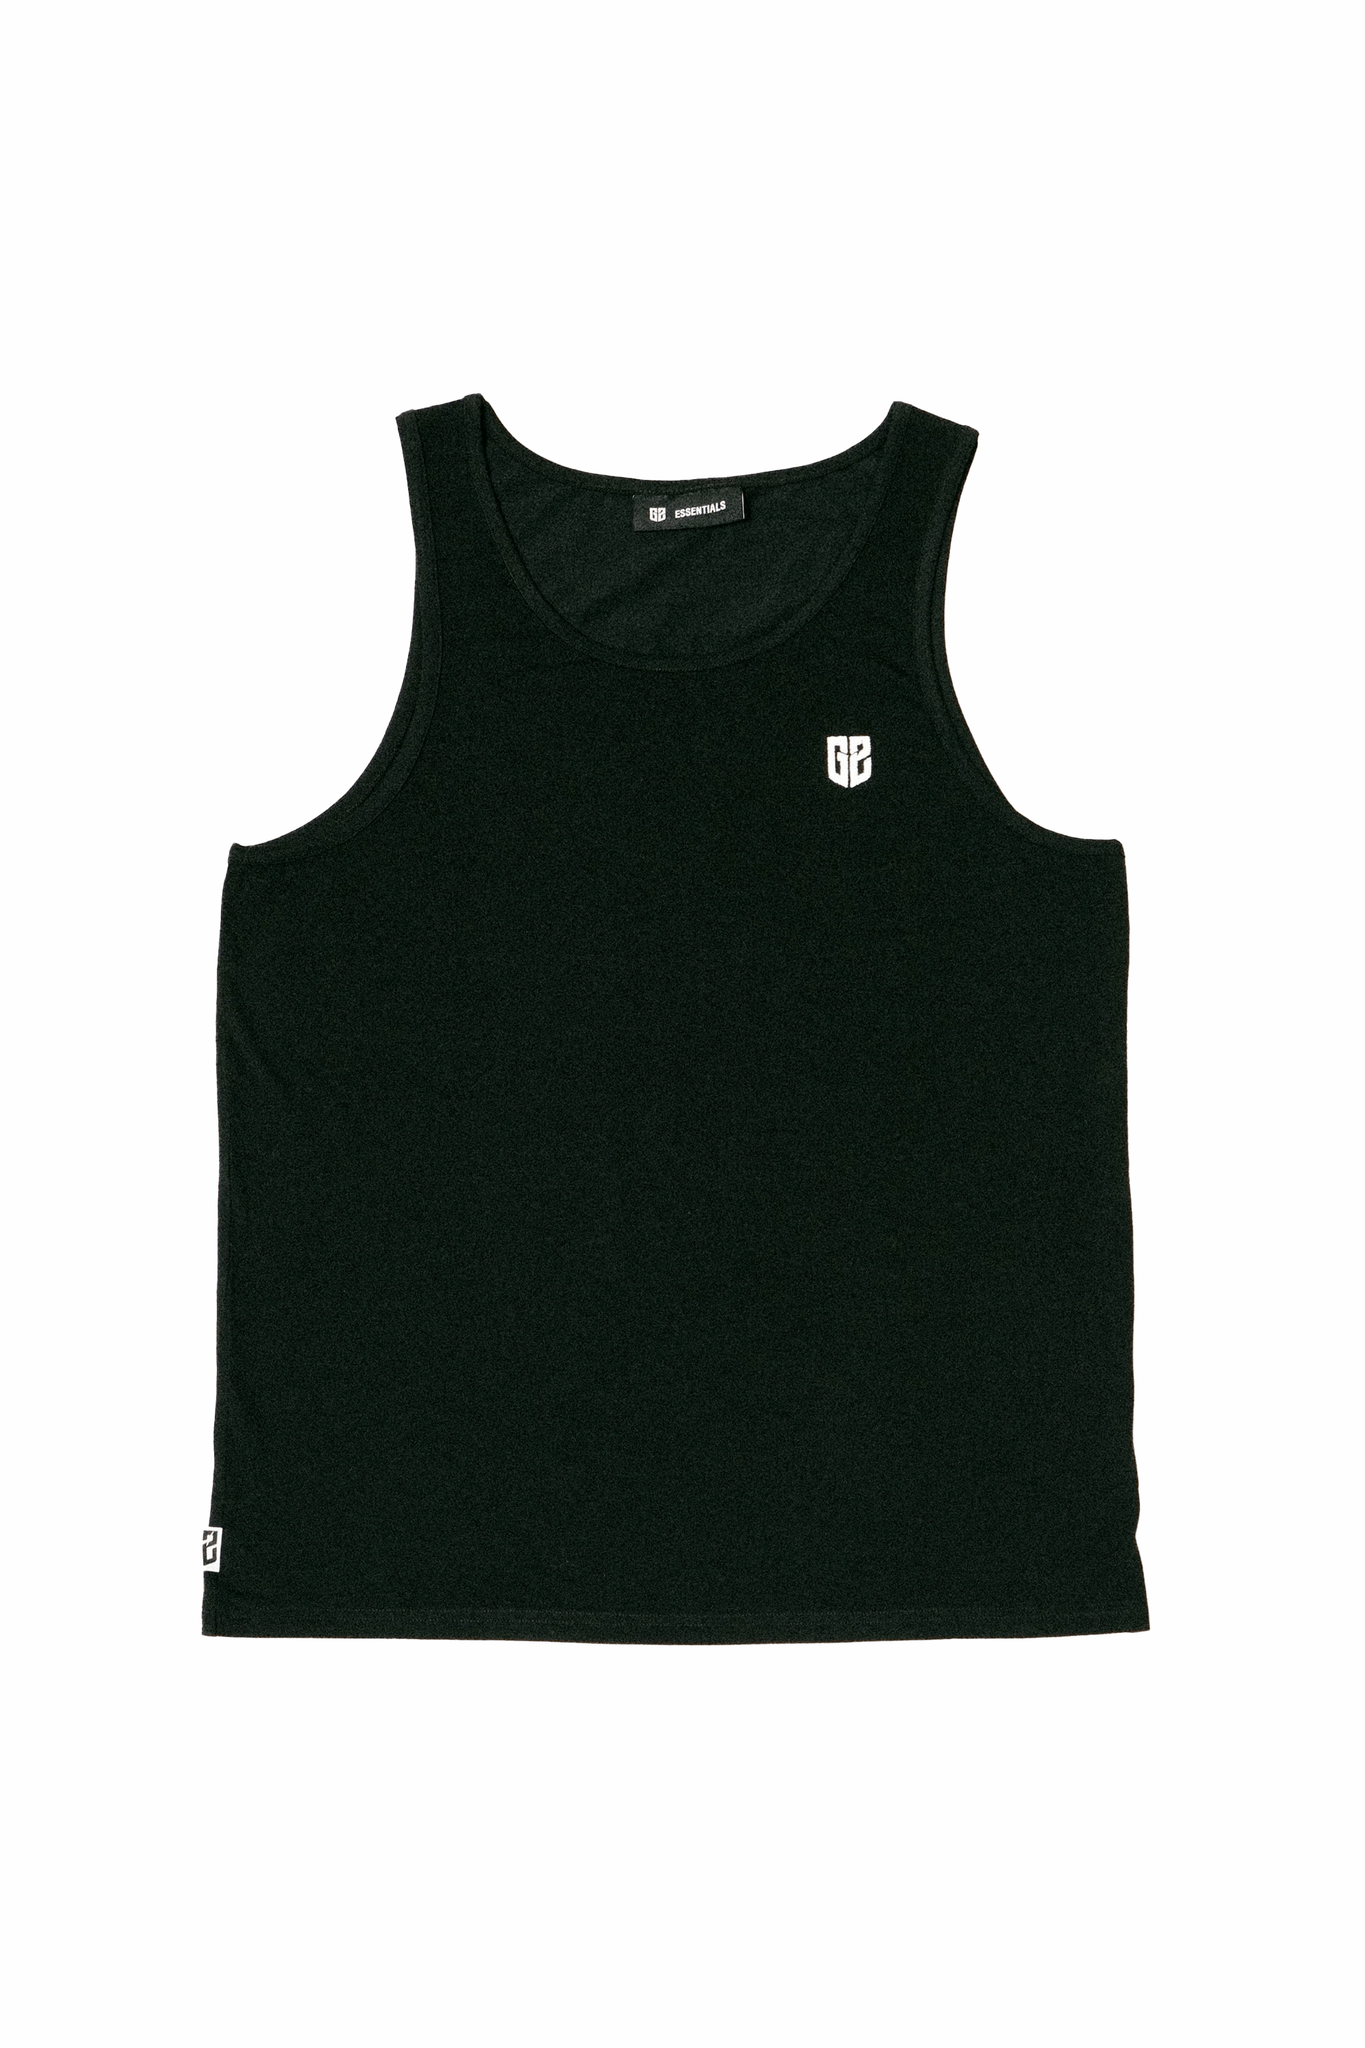 Black G2 Esports essentials tank top, ideal for casual and athletic wear. Represent your favorite esports team with this stylish and comfortable top